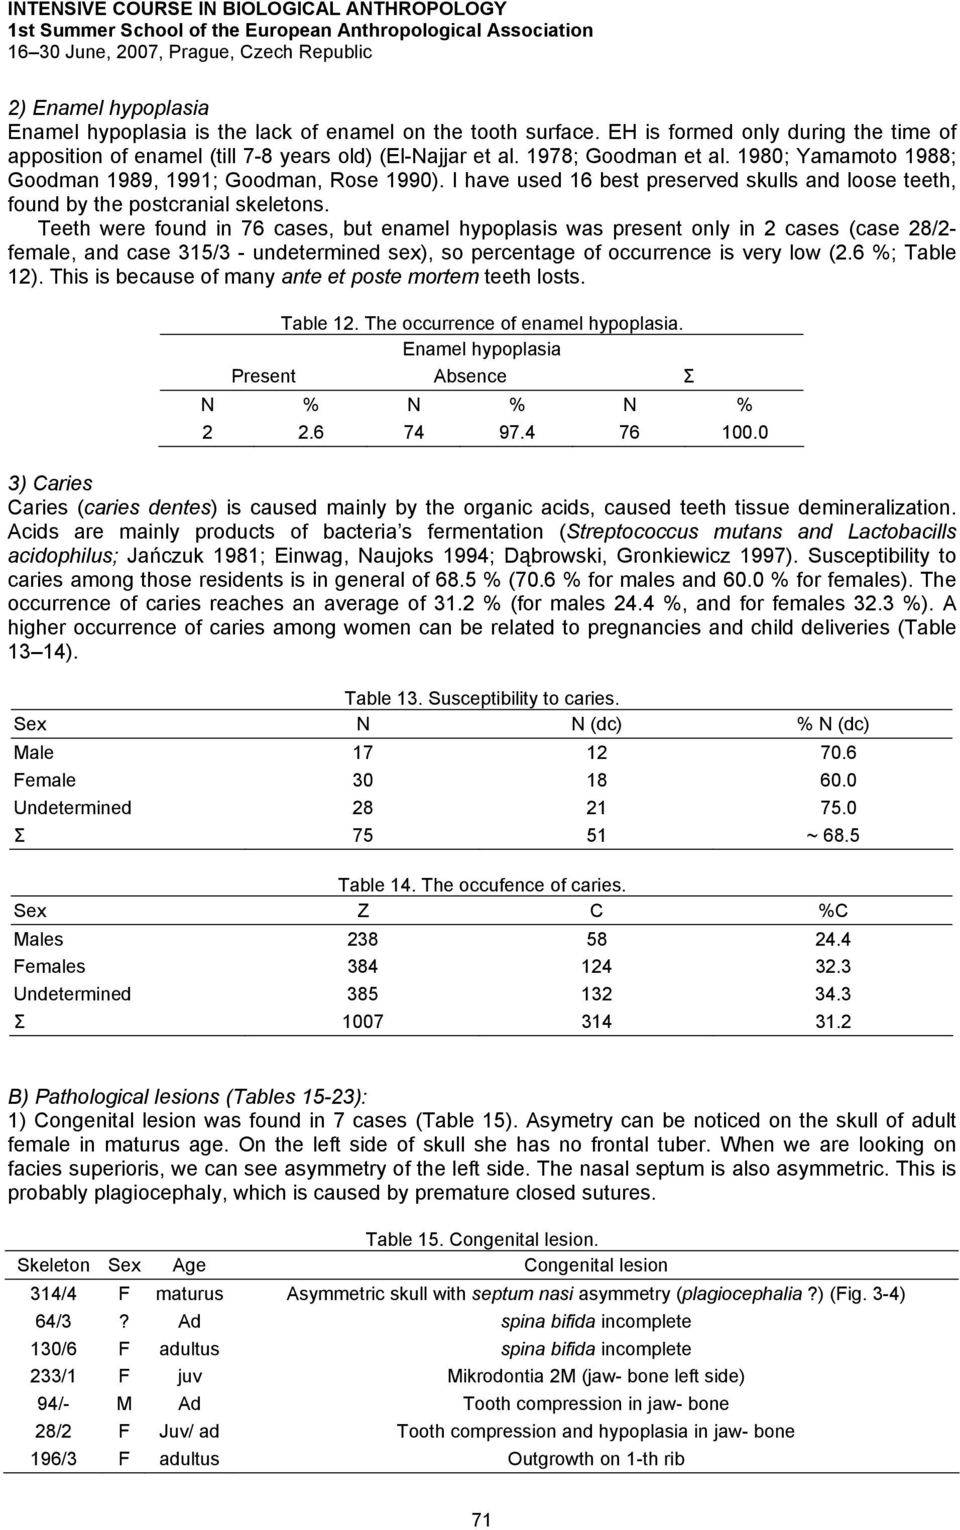 Teeth were found in 76 cases, but enamel hypoplasis was present only in 2 cases (case 28/2- female, and case 315/3 - undetermined sex), so percentage of occurrence is very low (2.6 %; Table 12).